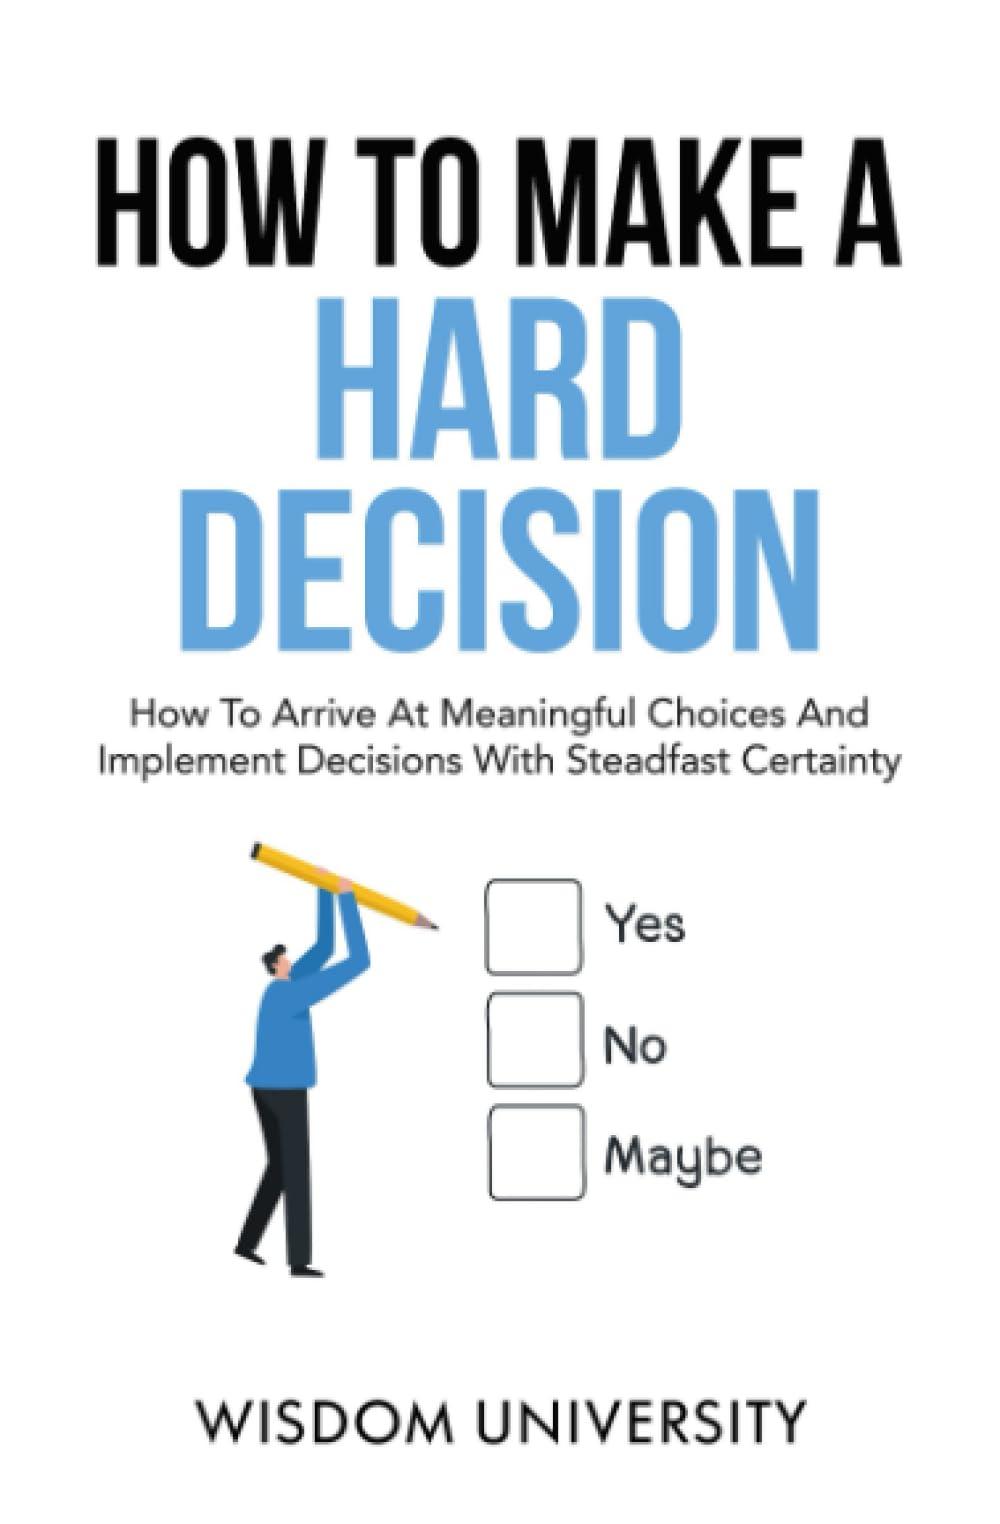 how to make a hard decision how to arrive at meaningful choices and implement decisions with steadfast